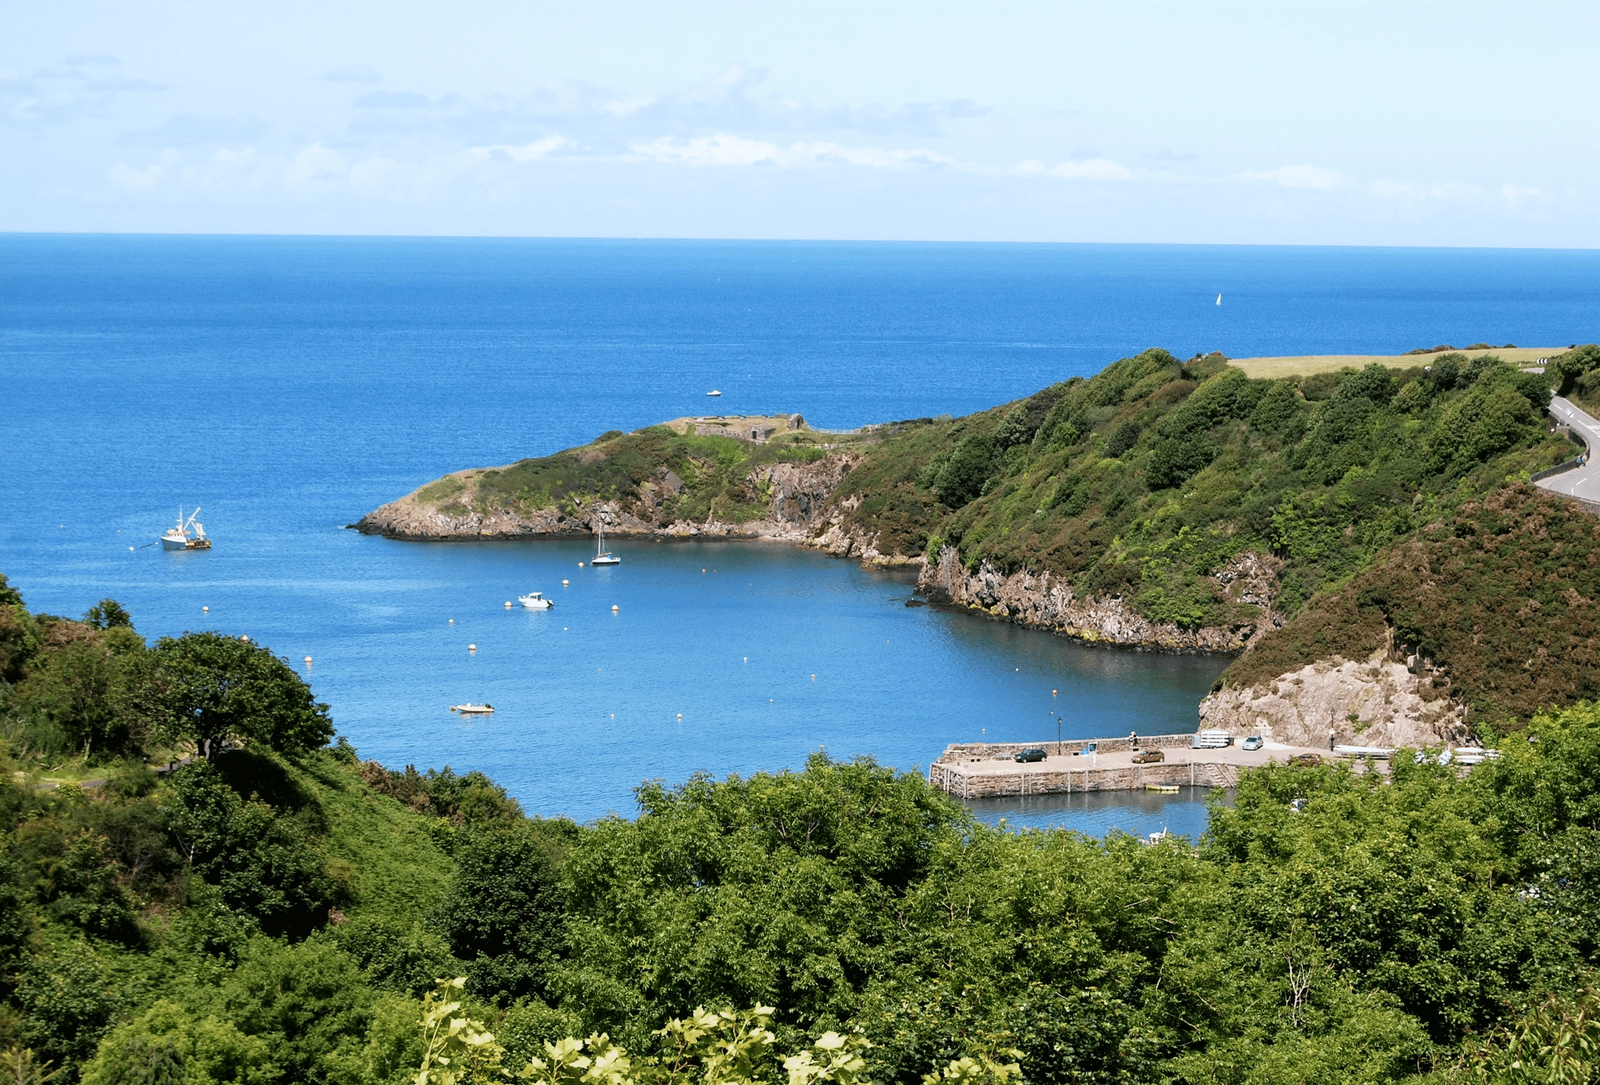 Hotels in Pembrokeshire